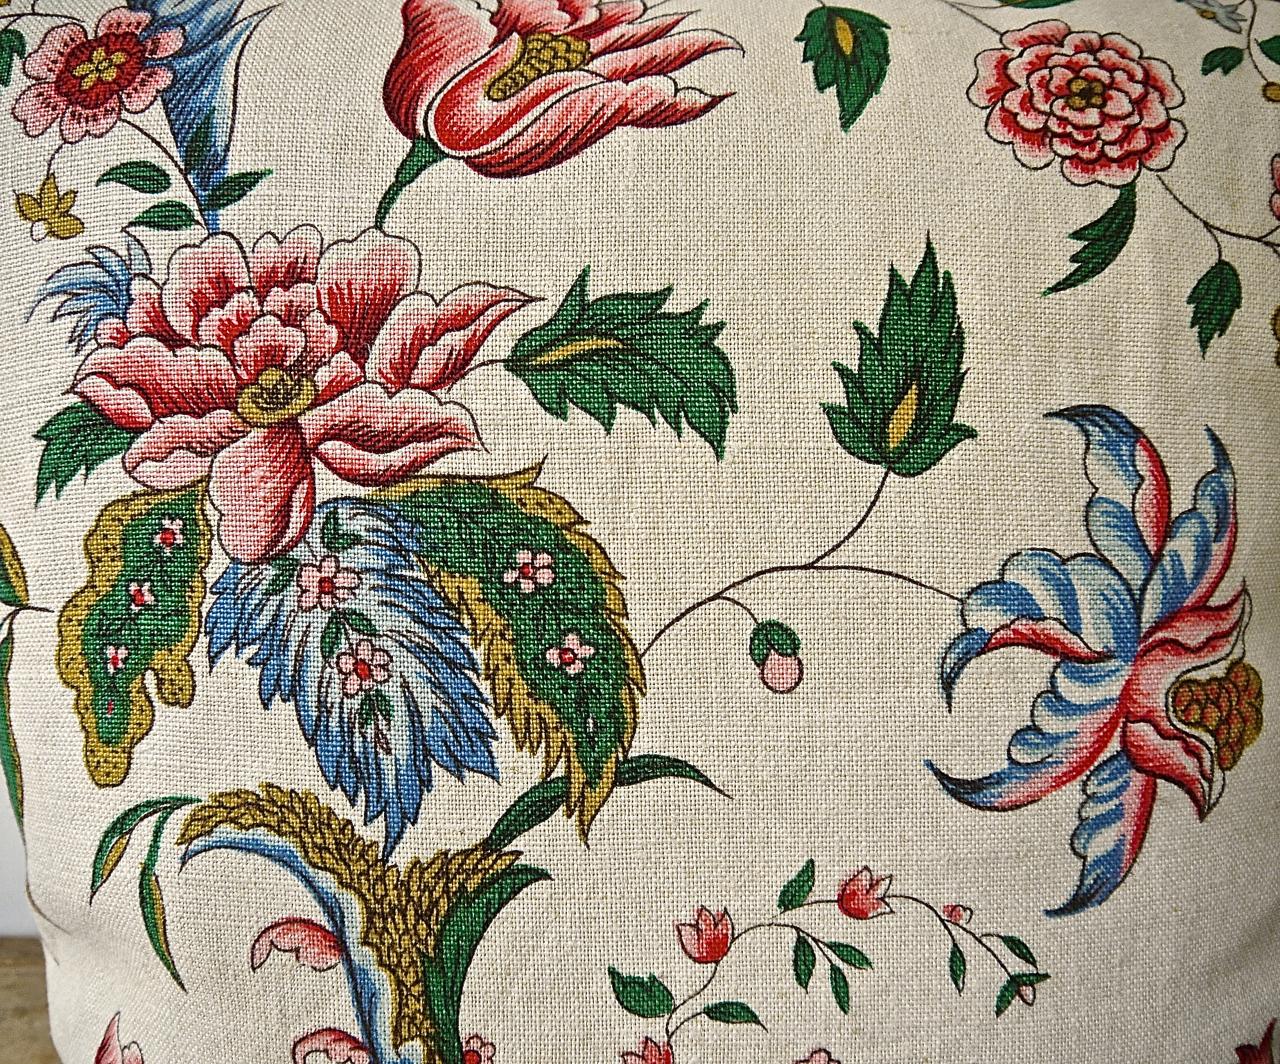 Mid-20th century, French hand printed linen cushion printed with large scale design of stylized exotic flowers and leaves in raspberry red and pink and blueson meandering branches.Self-backed and slip-stitched closed with duck feather cushion pad.